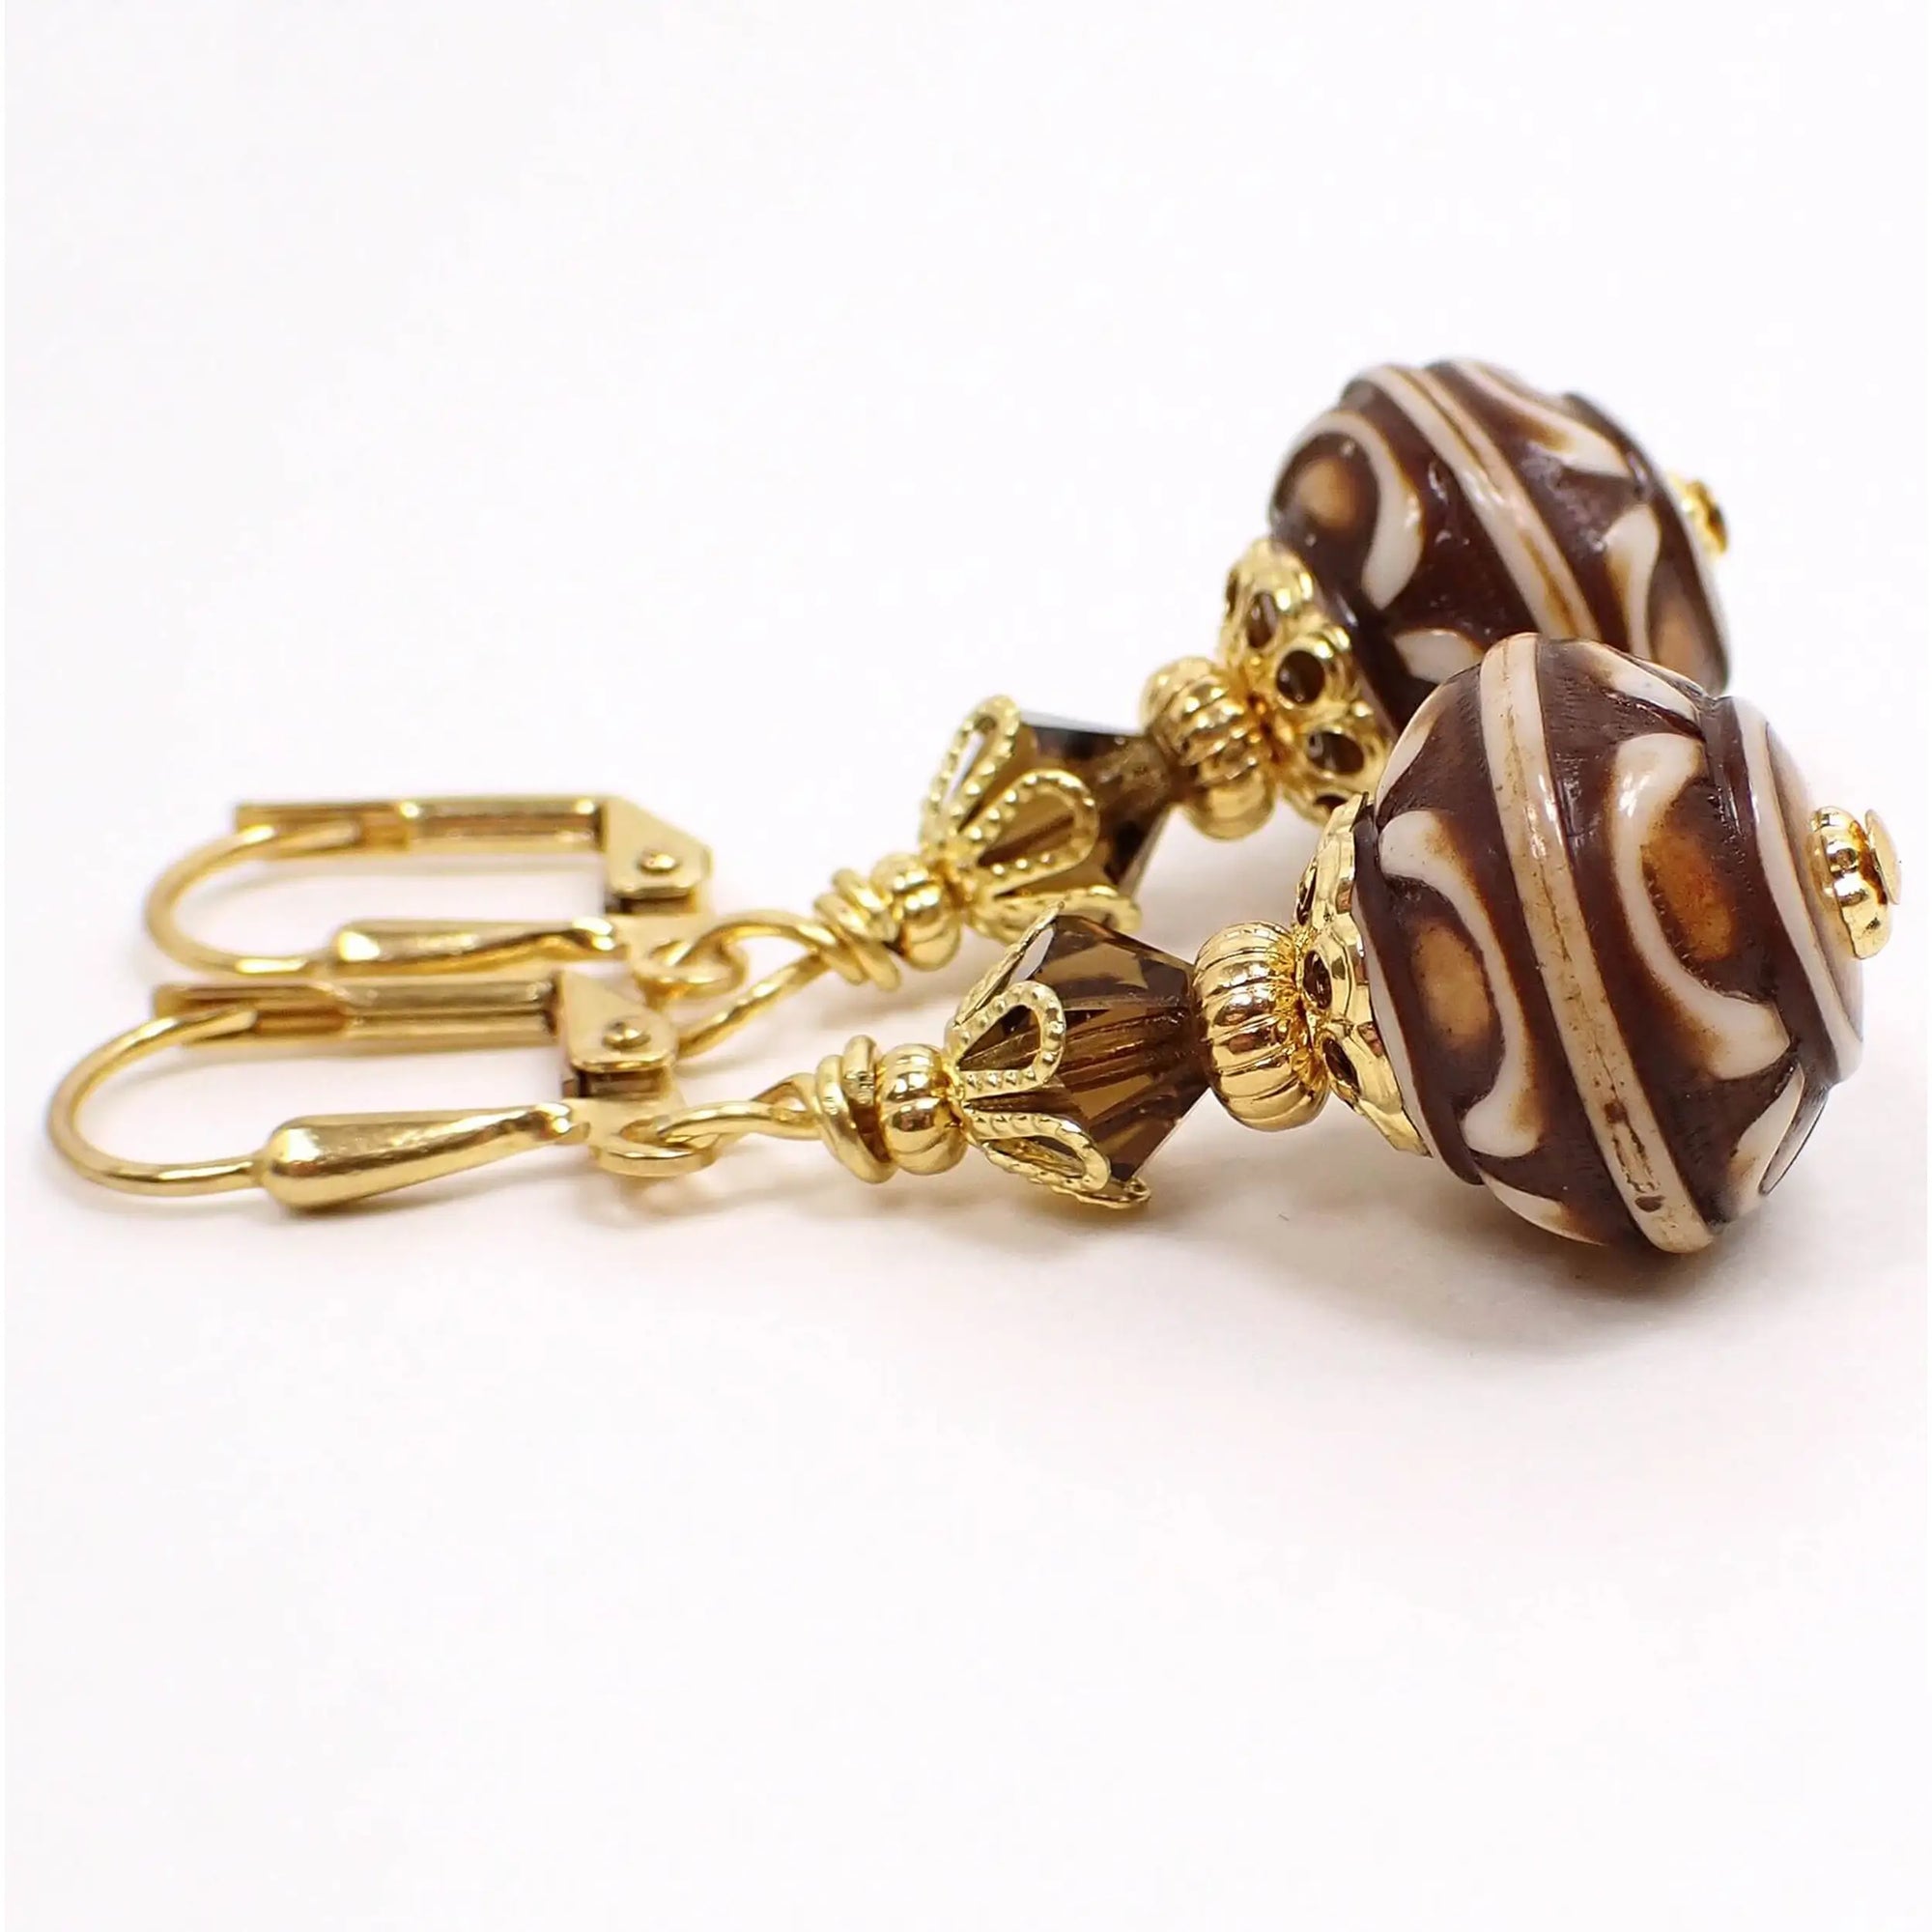 Side view of the handmade acrylic lantern earrings. The metal is gold tone in color. There are faceted brown glass crystal beads at the top. The bottom beads are acrylic and are saucer shaped with dark brown and cream color textured pattern.